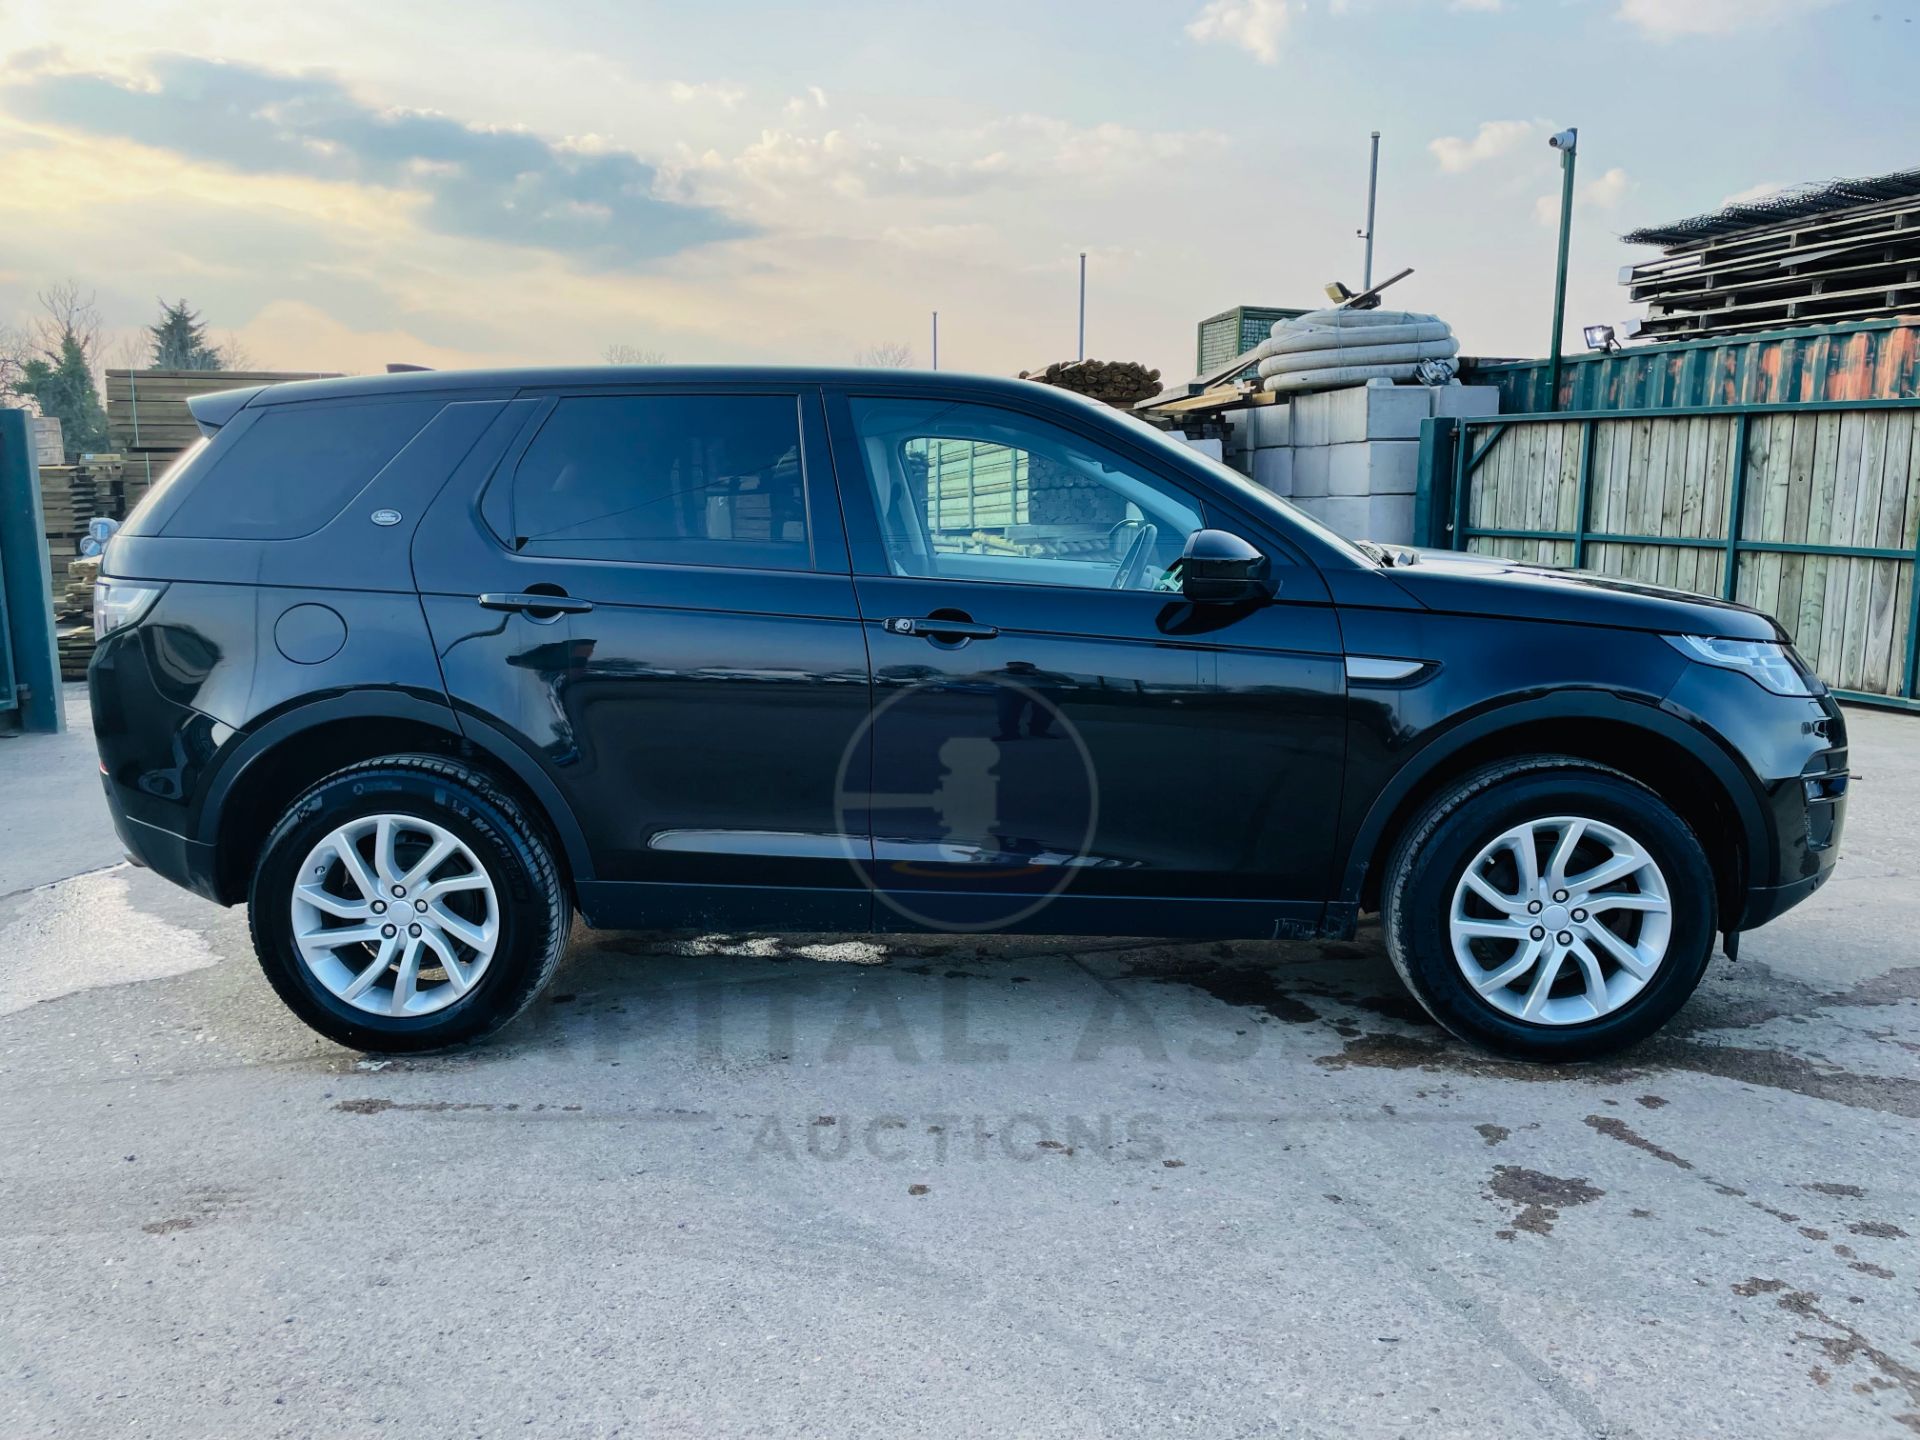 (On Sale) LAND ROVER DISCOVERY SPORT *SE TECH* 7 SEATER SUV (2018 - EURO 6) TD4 - AUTO *LOW MILEAGE* - Image 12 of 35